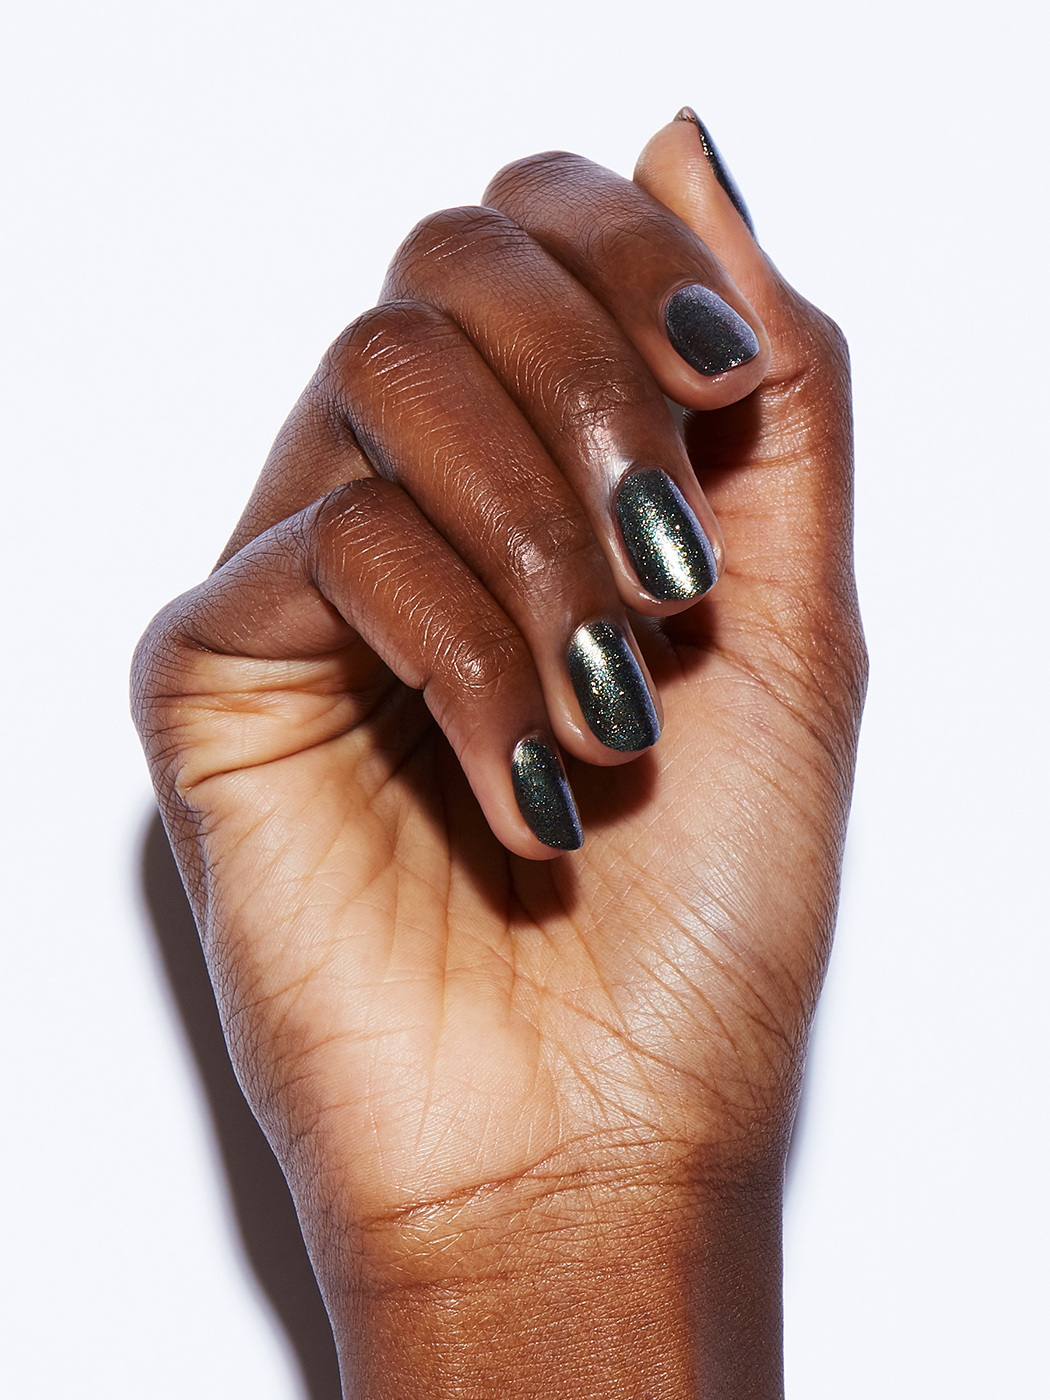 What Are Static Nails? I Tried the DIY Press-On Manicure Kit